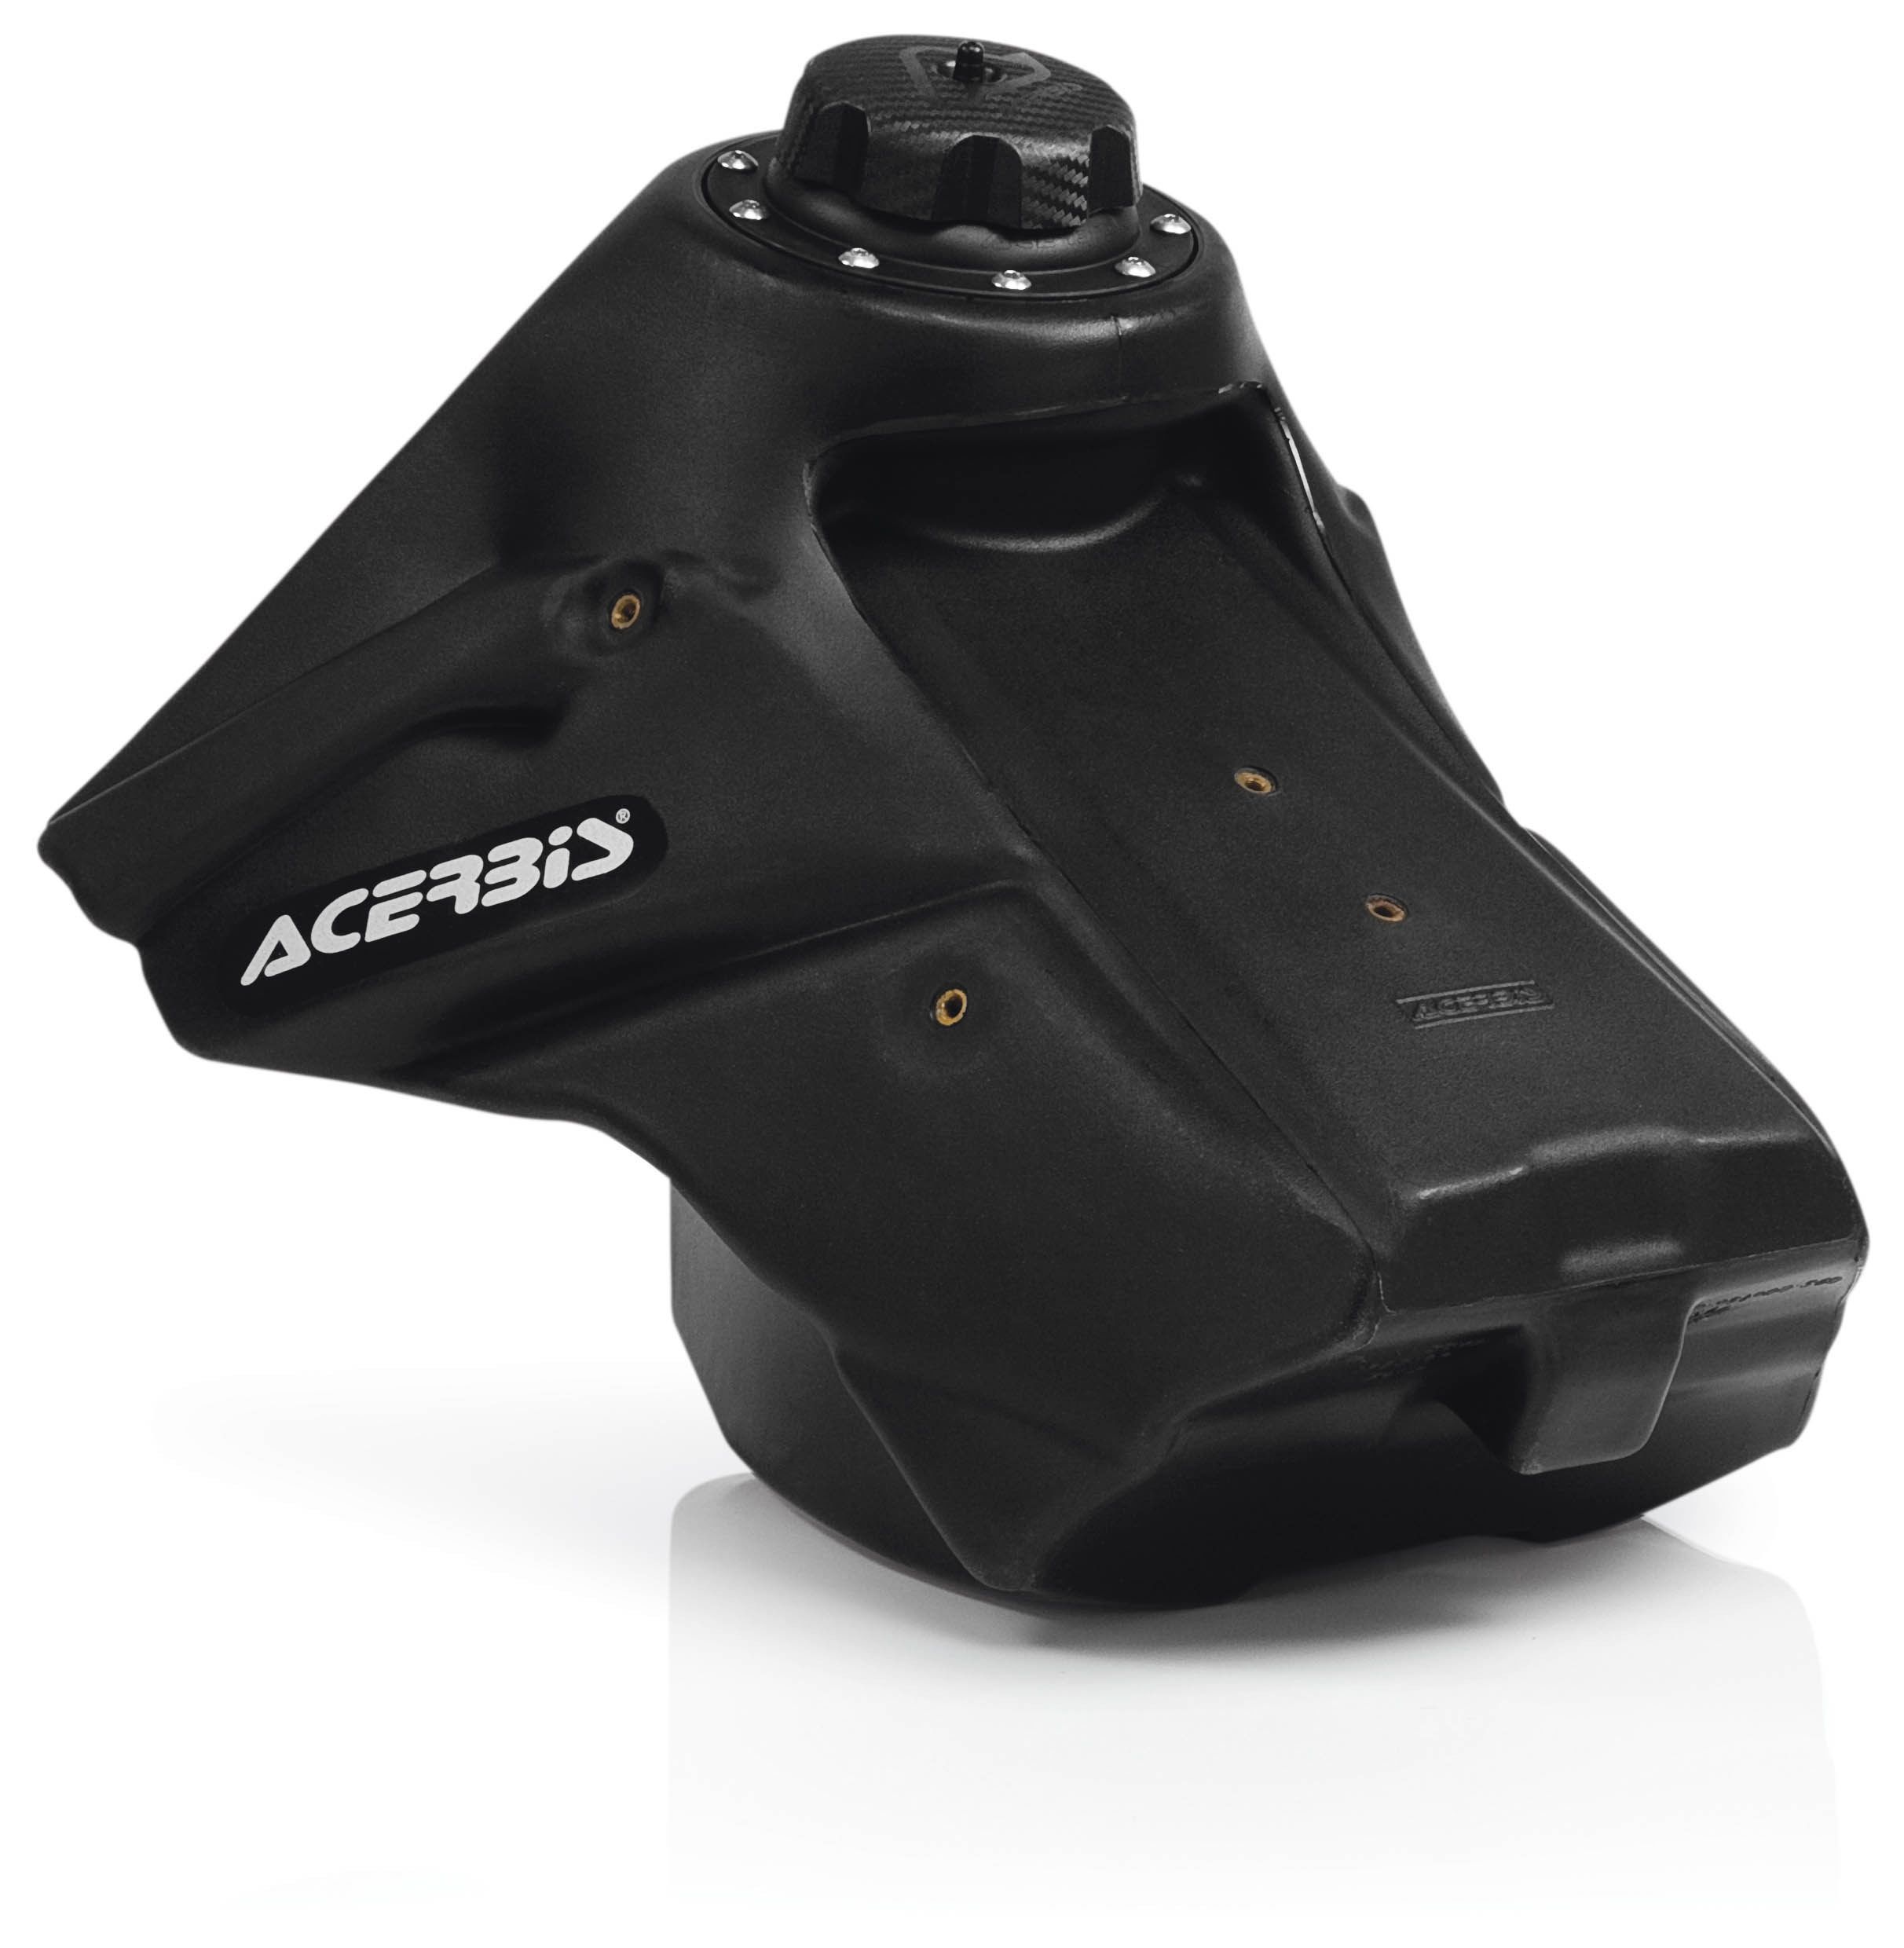 Acerbis Gas Tank - Features, Benefits, And Considerations